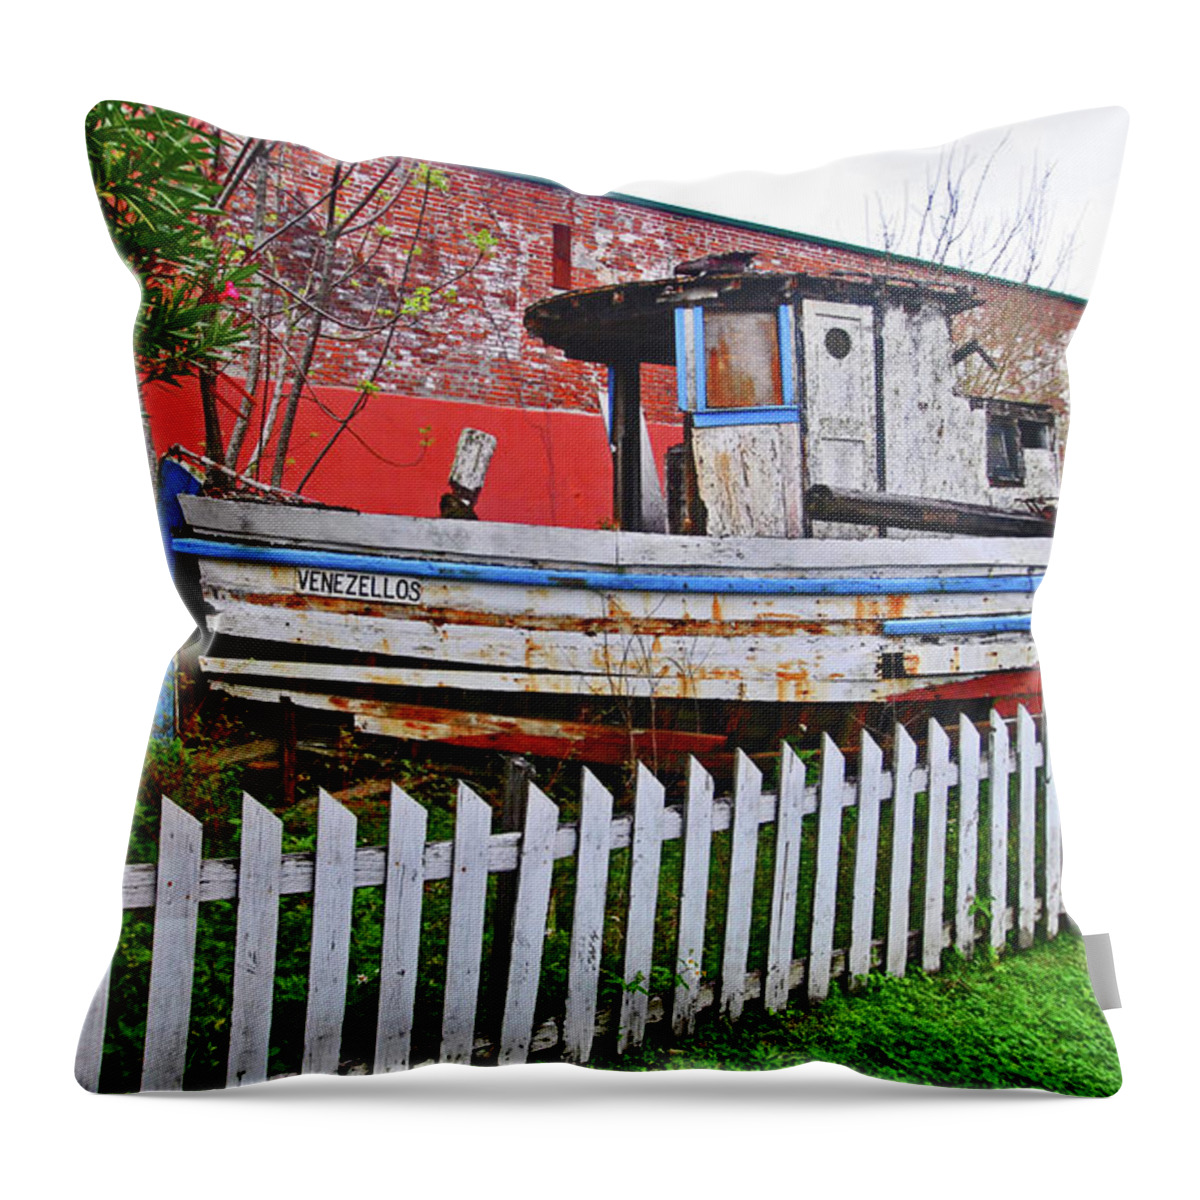 Apalachicola Throw Pillow featuring the photograph Redneck Dry Dock by George D Gordon III